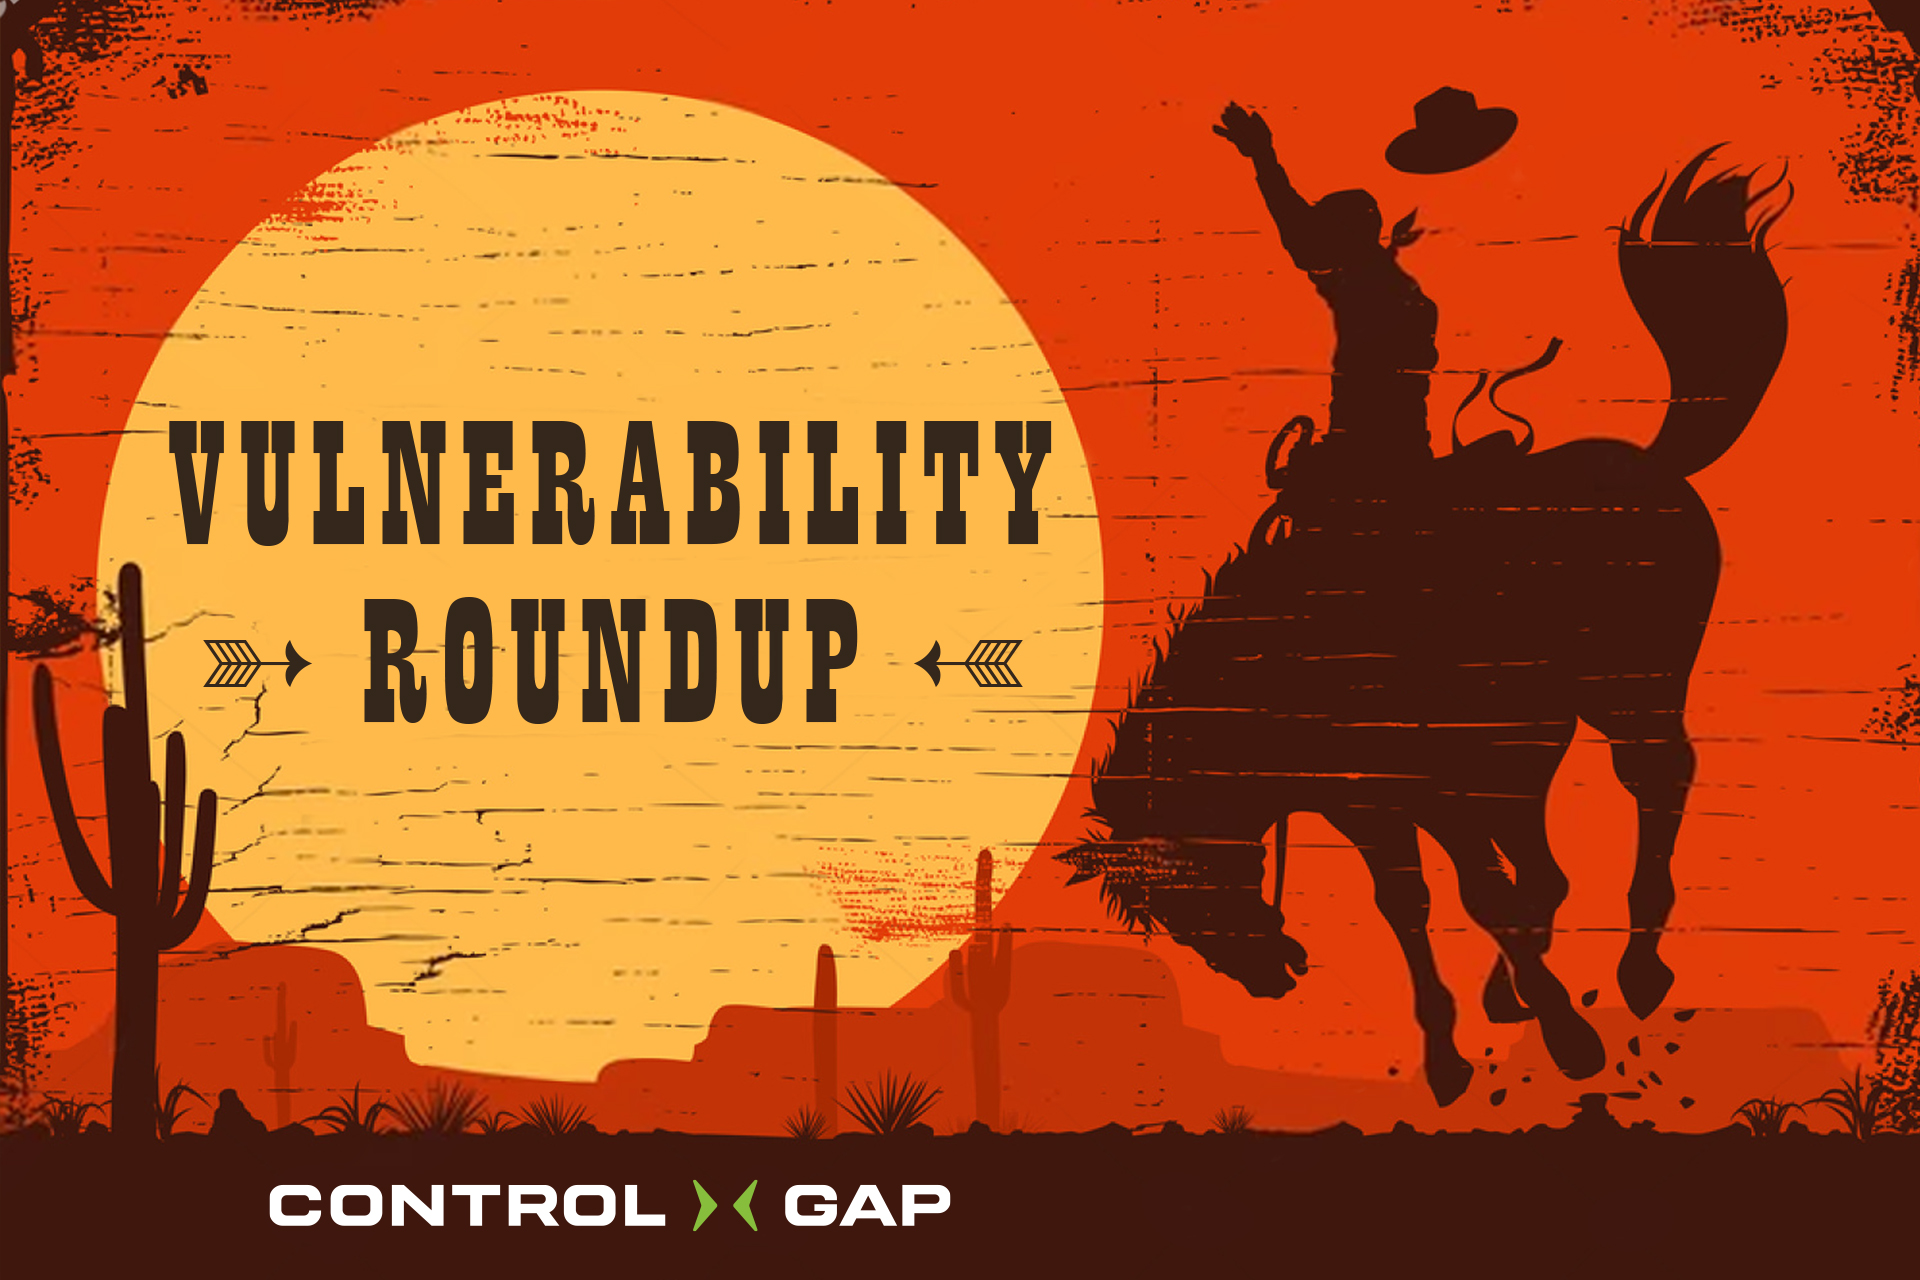 Control Gap Vulnerability Roundup: February 25th to March 3rd